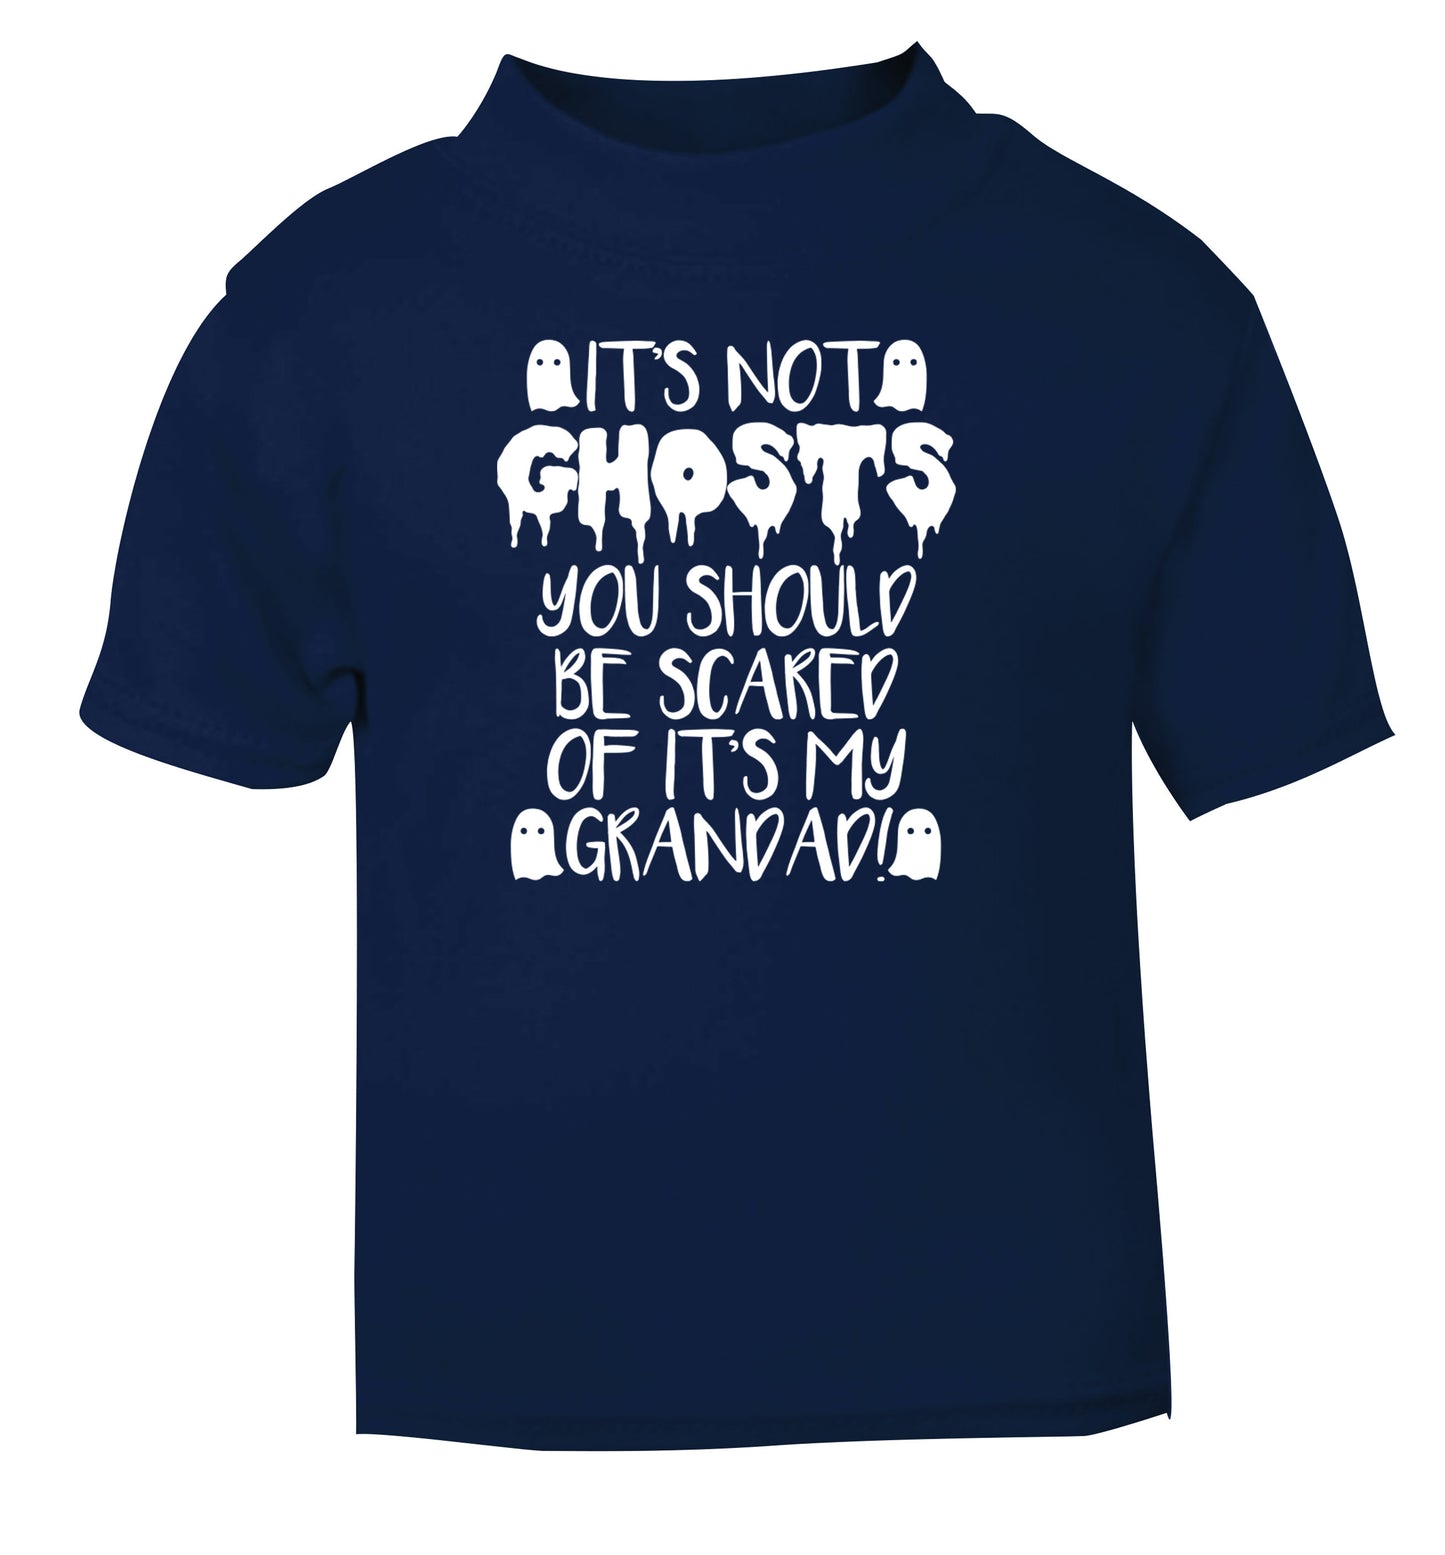 It's not ghosts you should be scared of it's my grandad! navy Baby Toddler Tshirt 2 Years